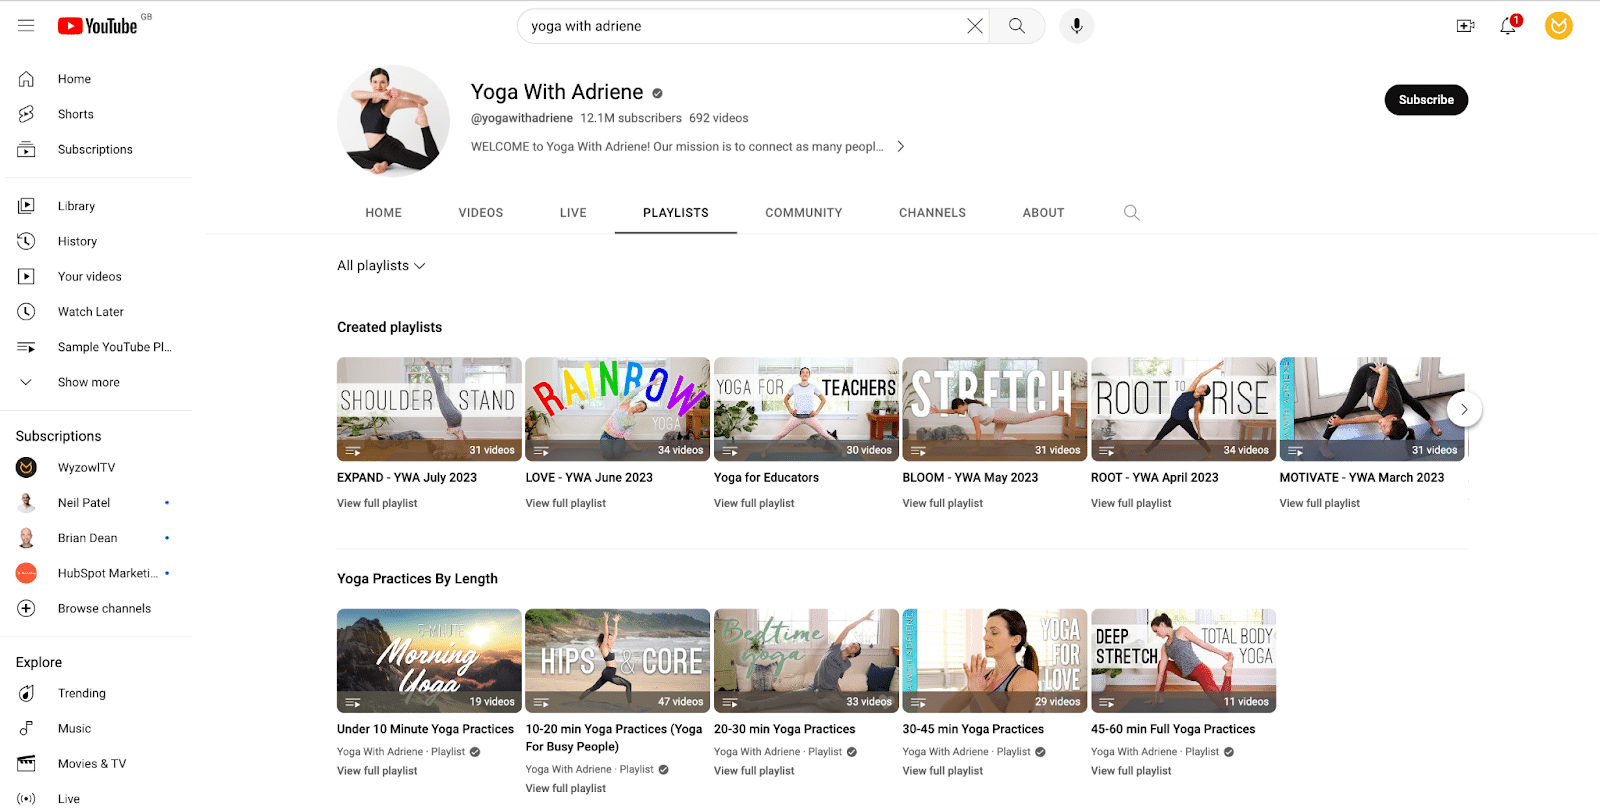 Yoga With Adriene YouTube page